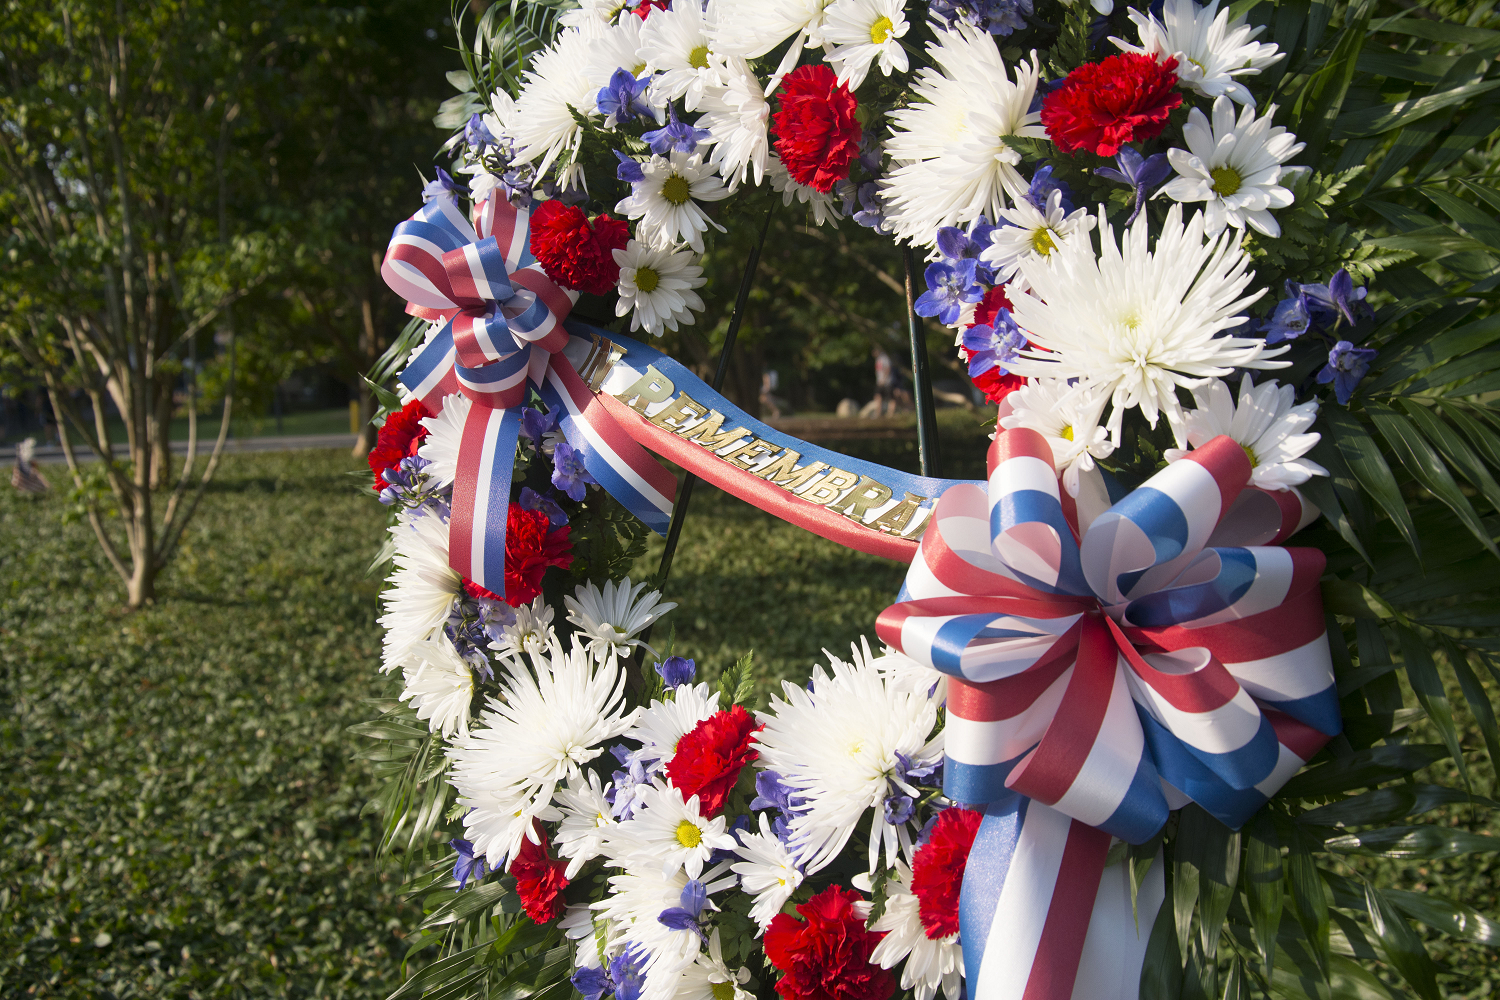 The commemoratory  wreath was moved to the remembrance grove after the school bell tolled 21 times in honor of the fallen alumni.